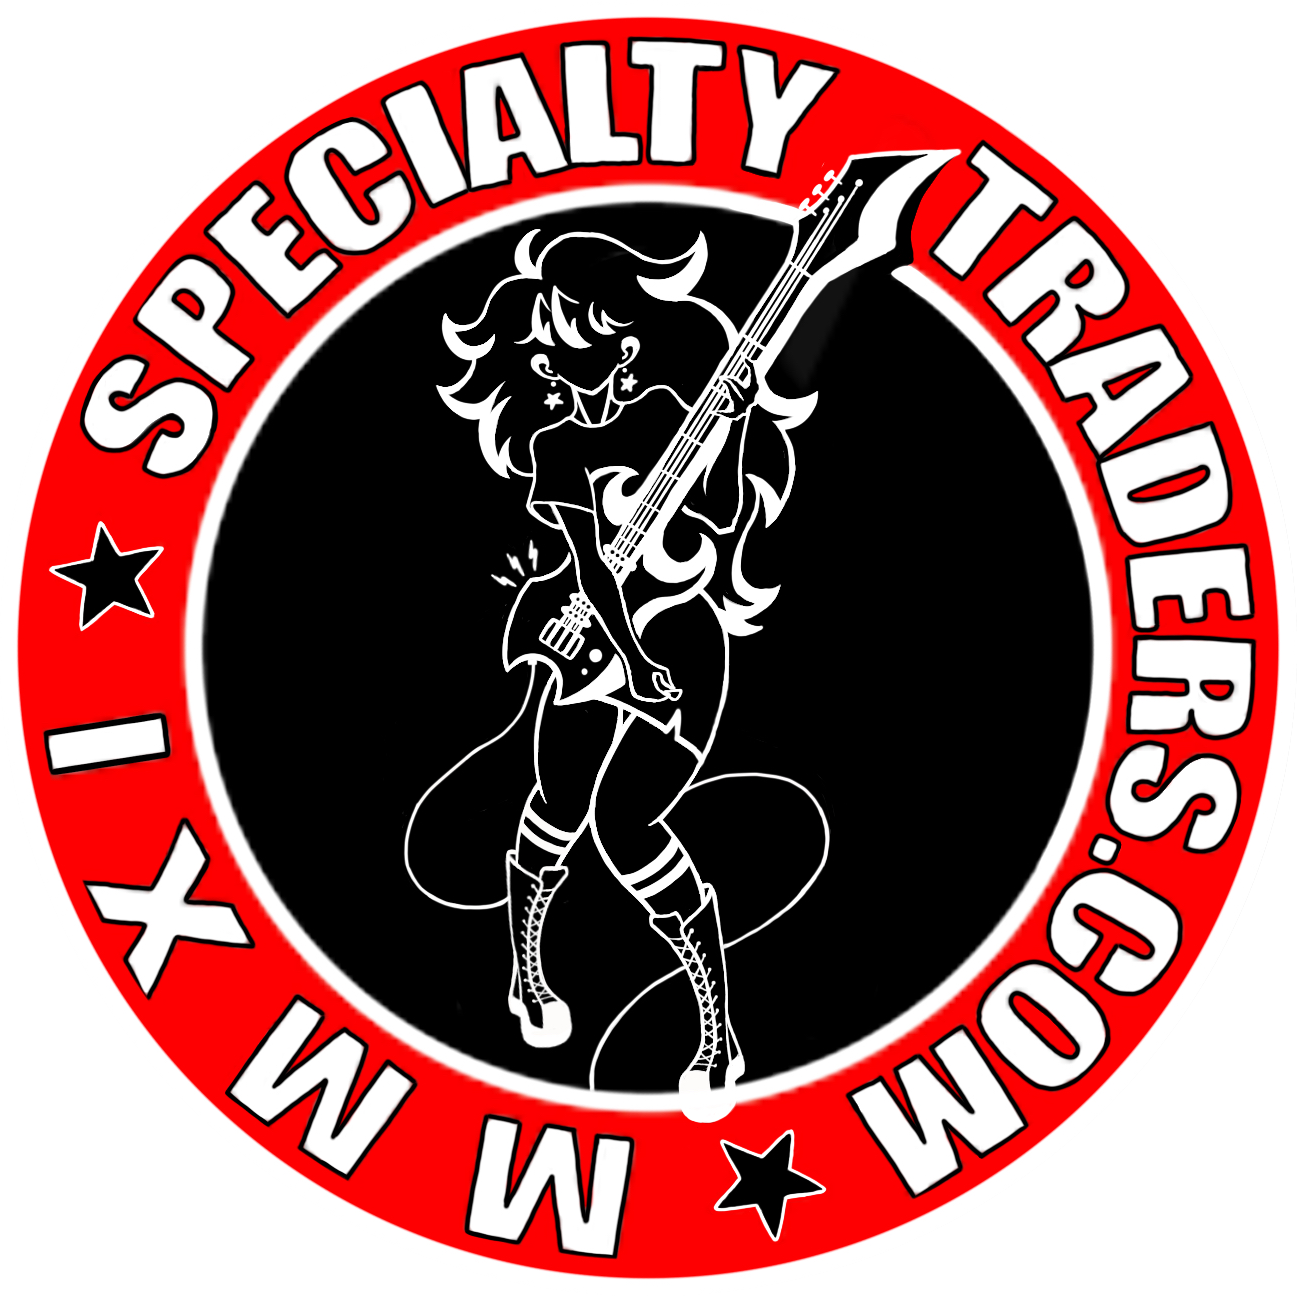 Specialty Traders